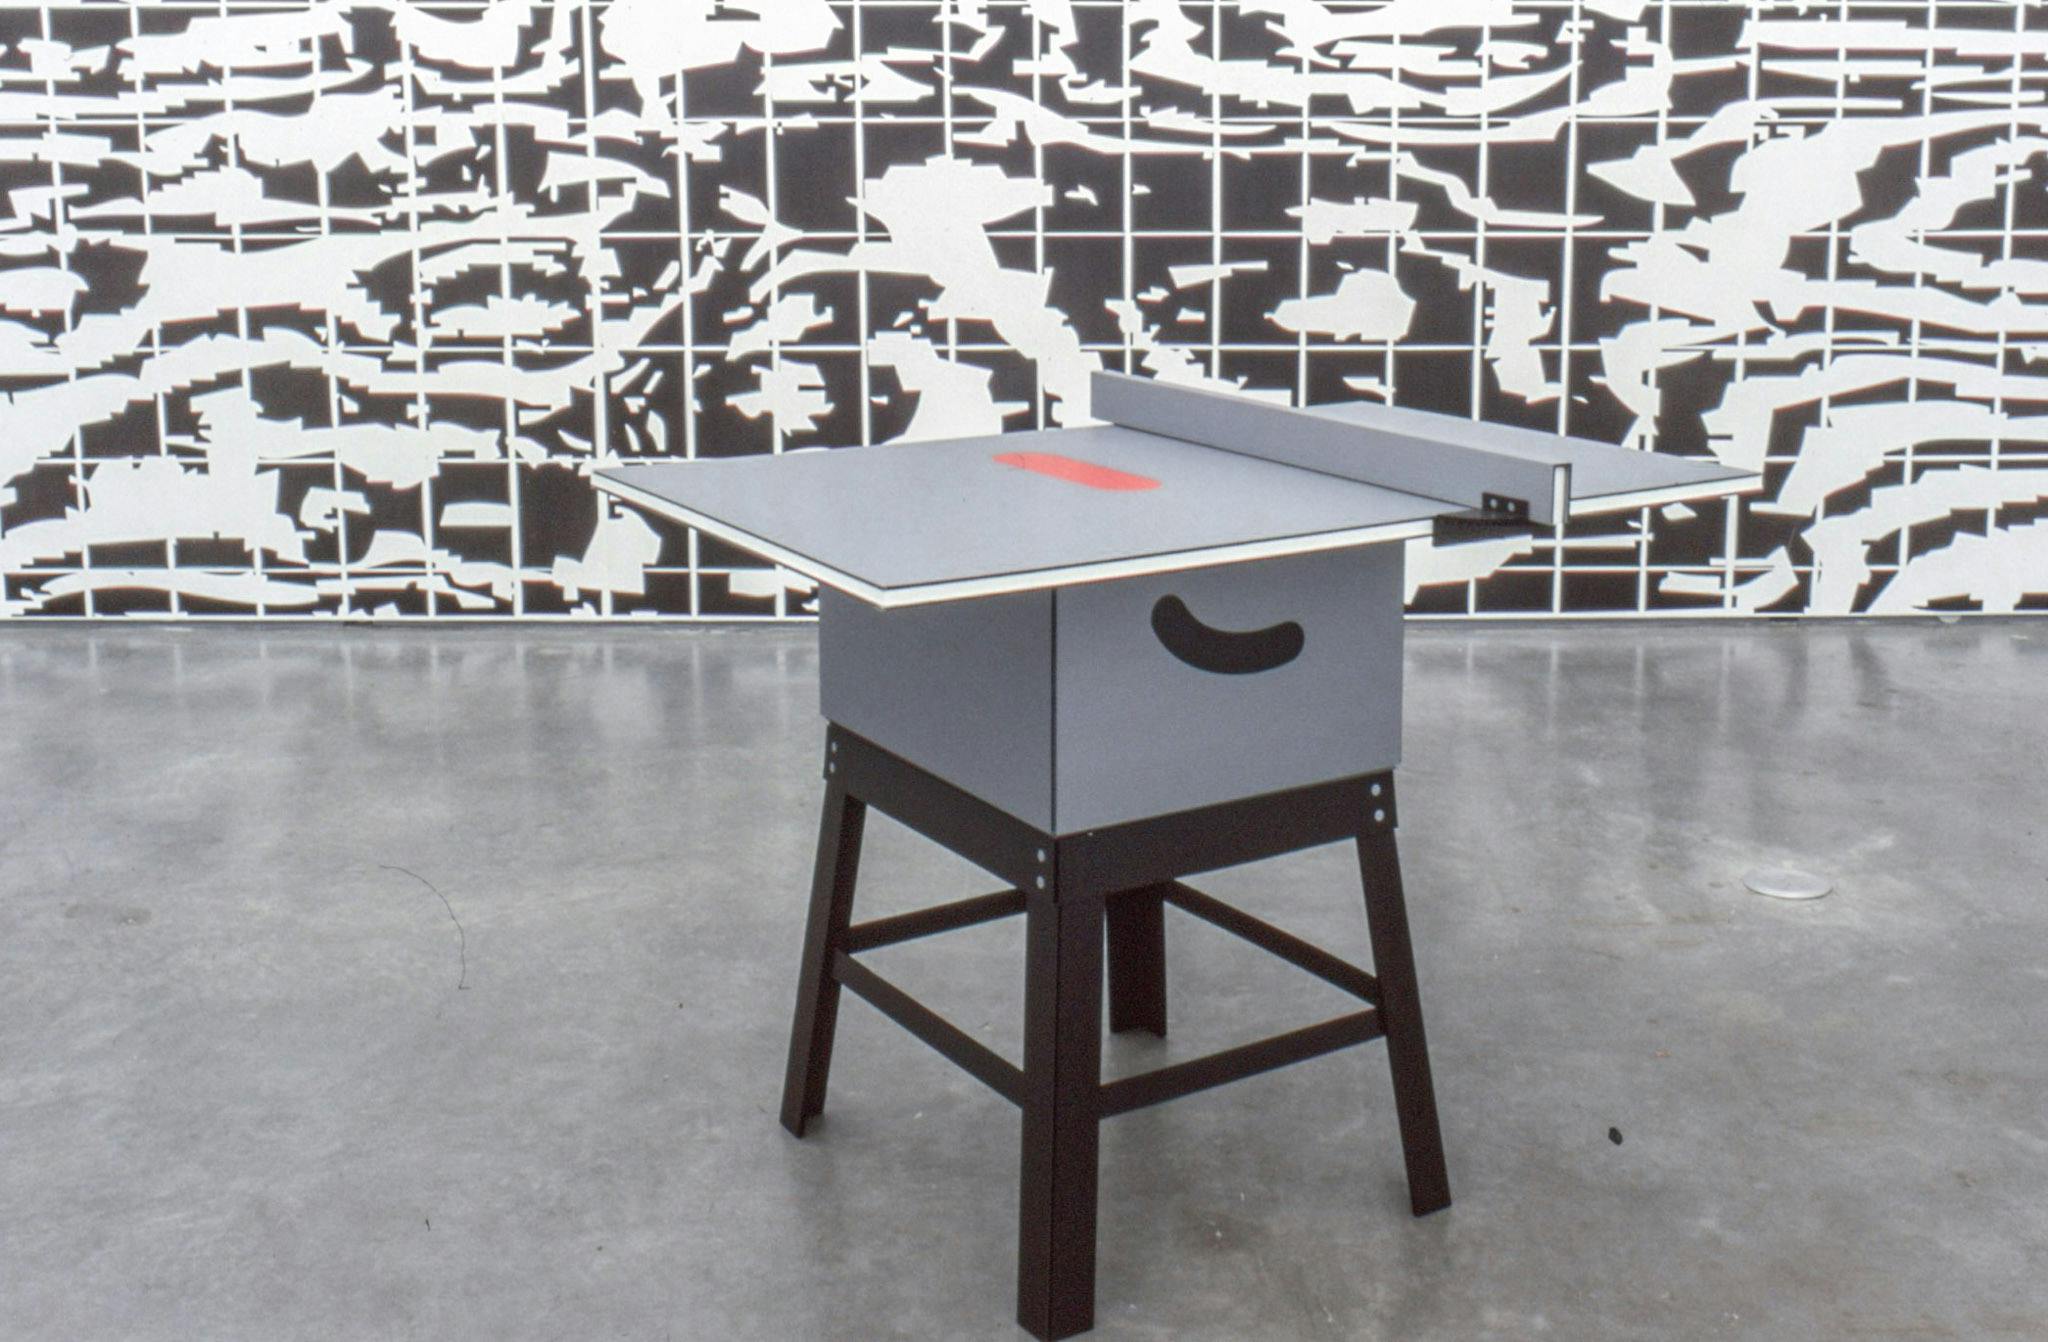 A small grey table is placed in a gallery. Its tabletop looks like that of a ping pong table. The gallery wall is covered with a black and white pattern similar to a wood surface. 